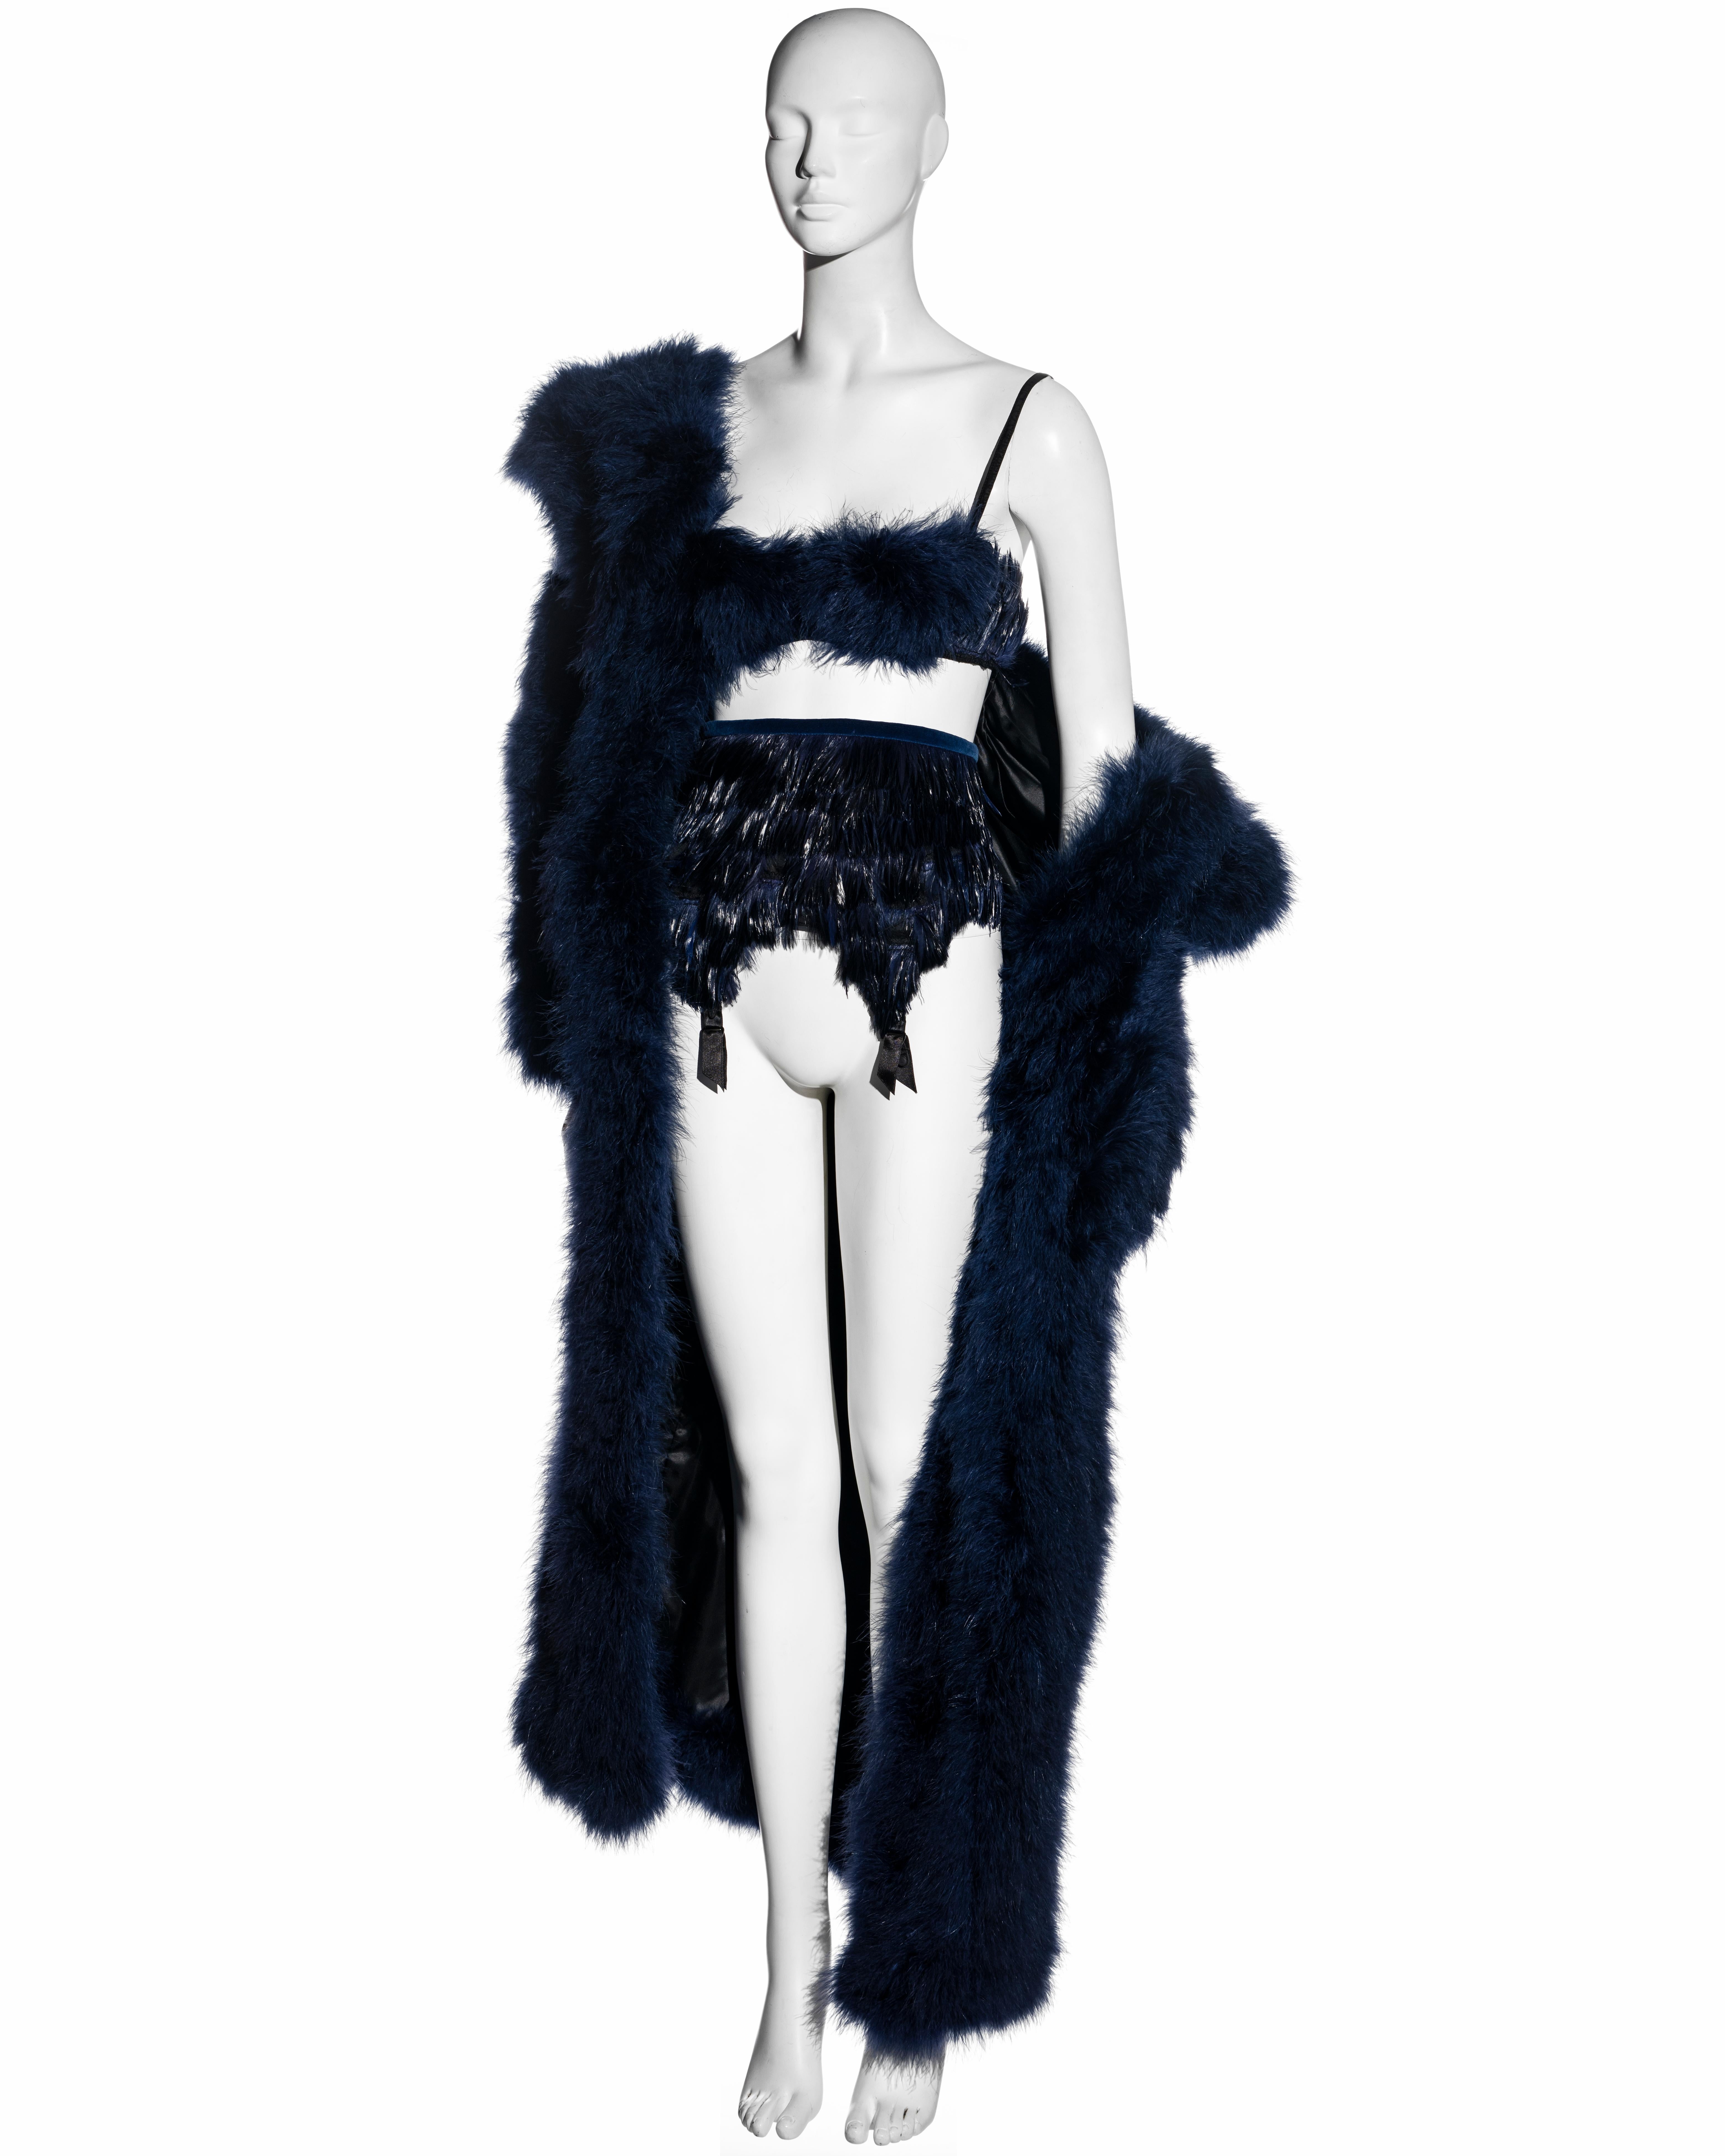 ▪ Chantal Thomass navy blue 3-piece evening set
▪ Oversized coat in marabou feathers 
▪ Matching marabou feather bra 
▪ Garter belt / corset in Rooster feathers 
▪ Size Small
▪ Fall-Winter 1993